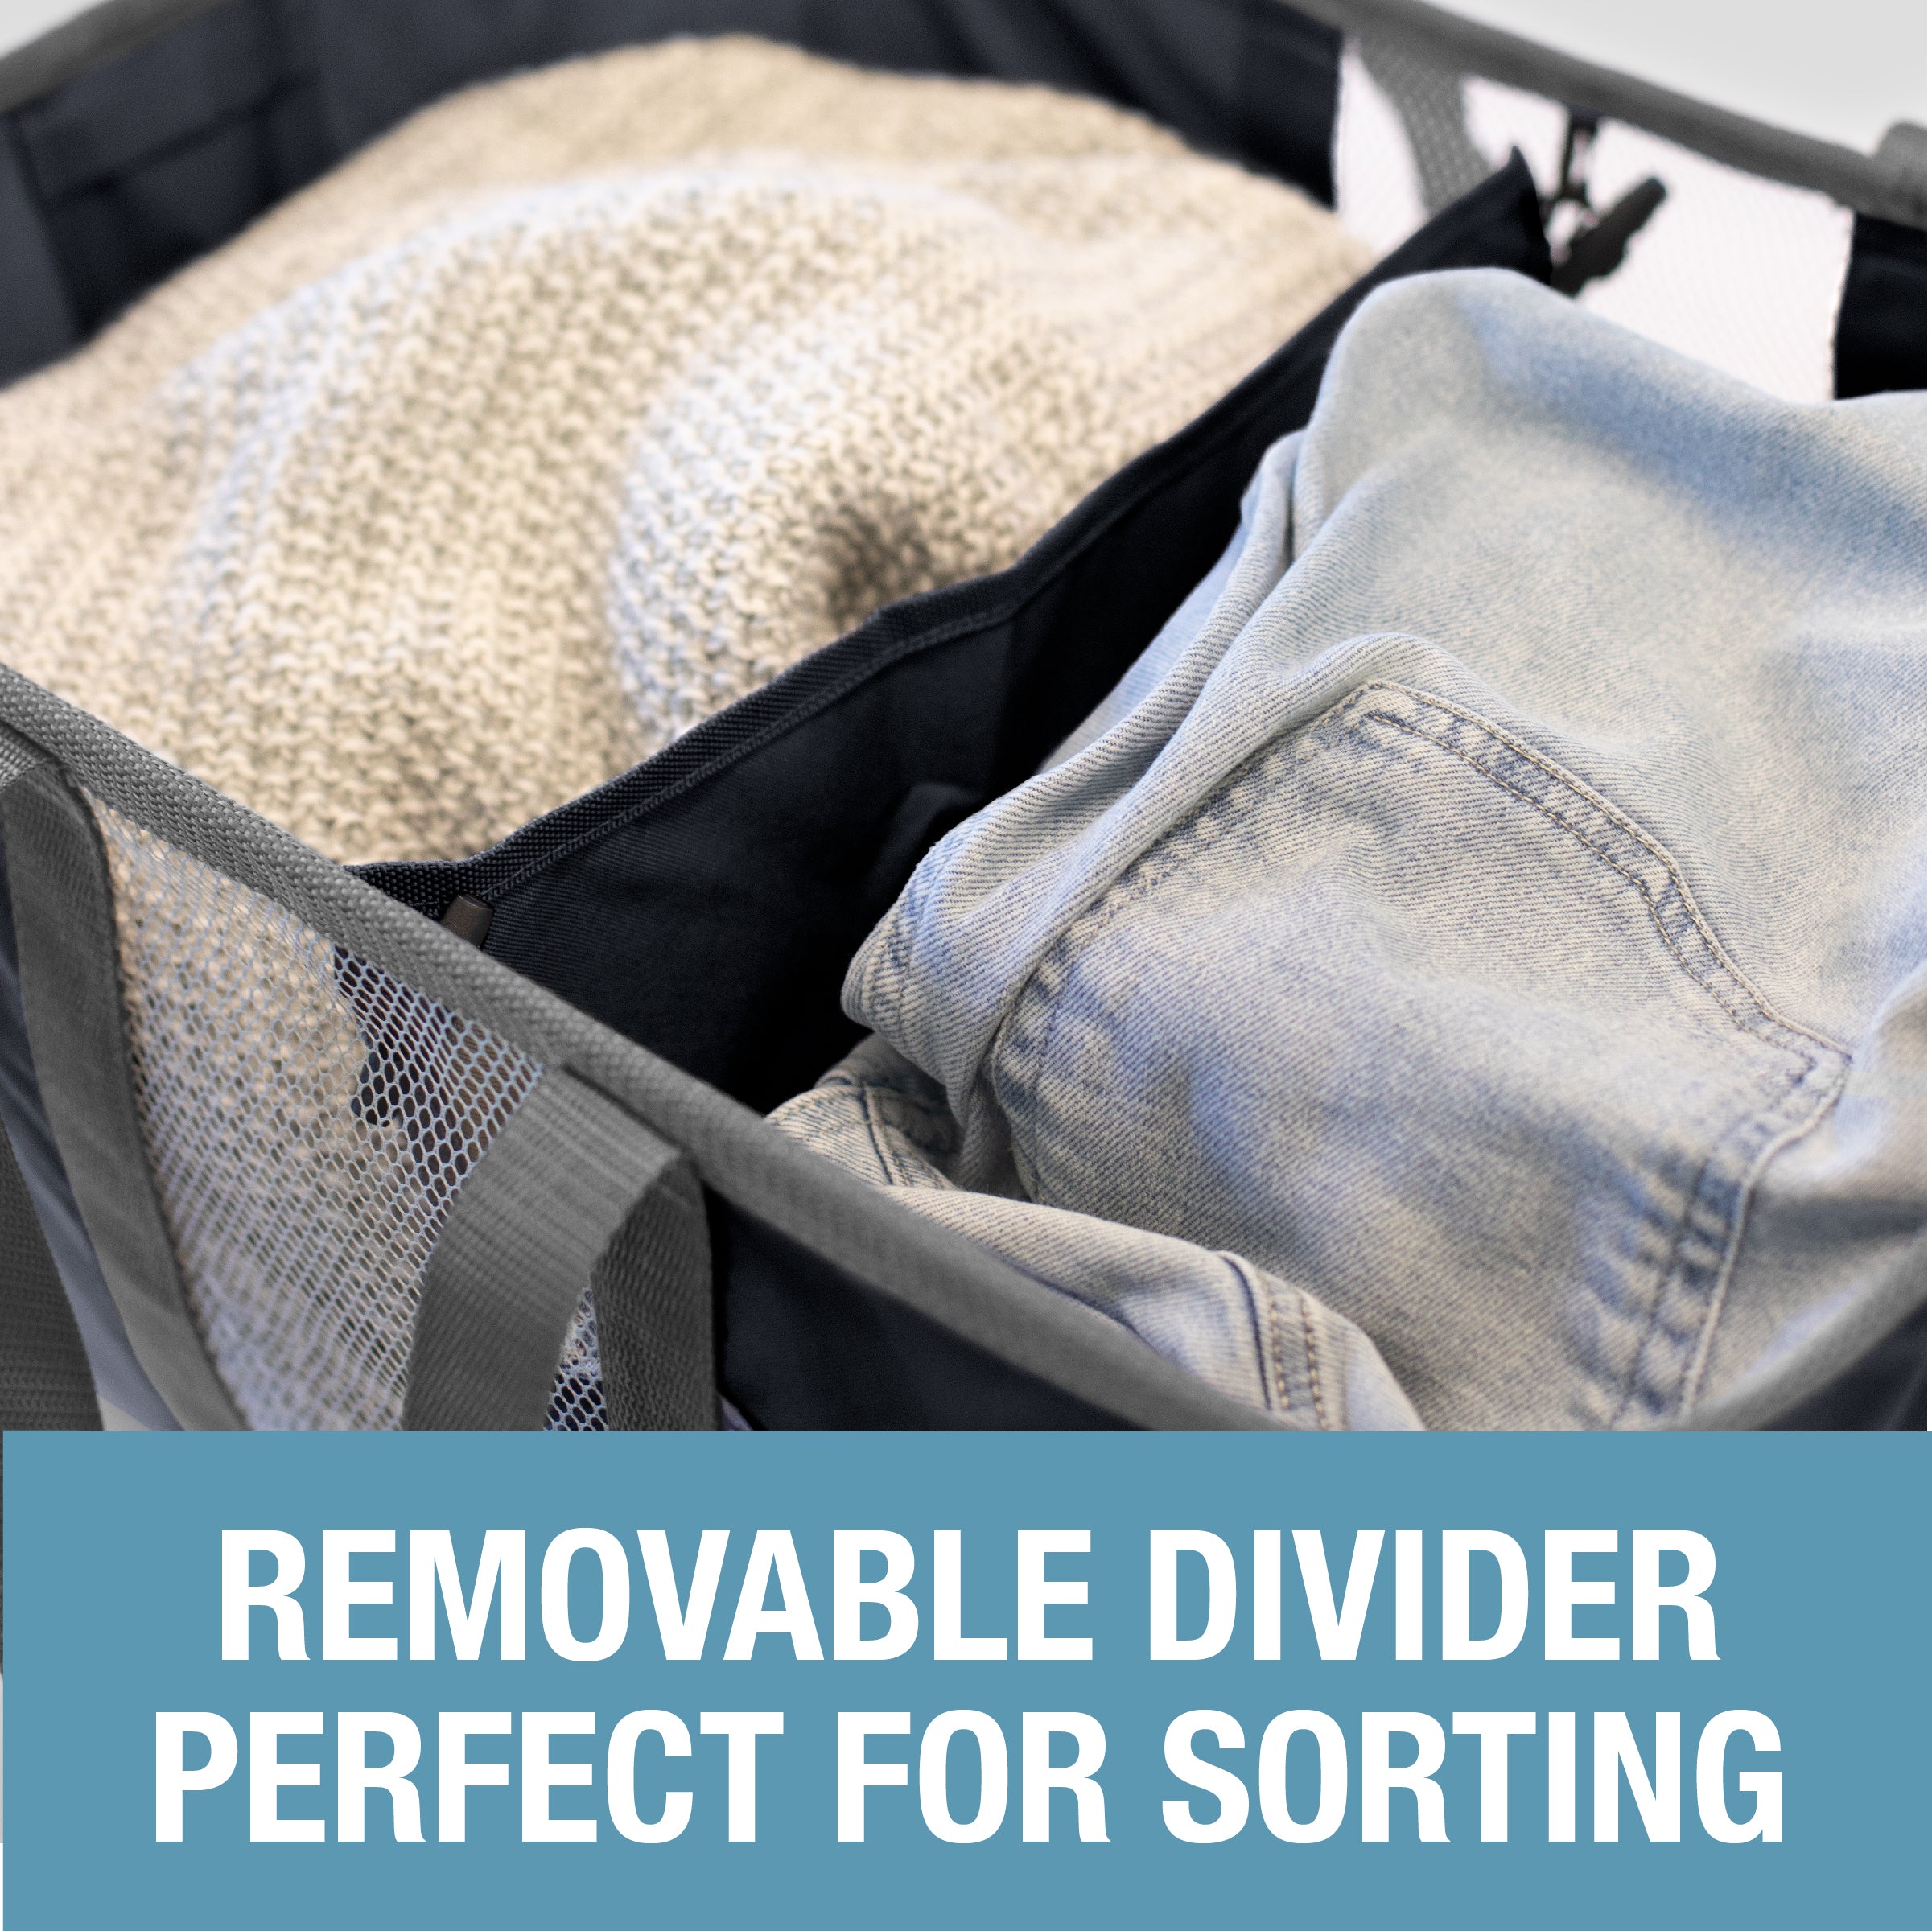  CleverMade Collapsible Fabric Laundry Basket